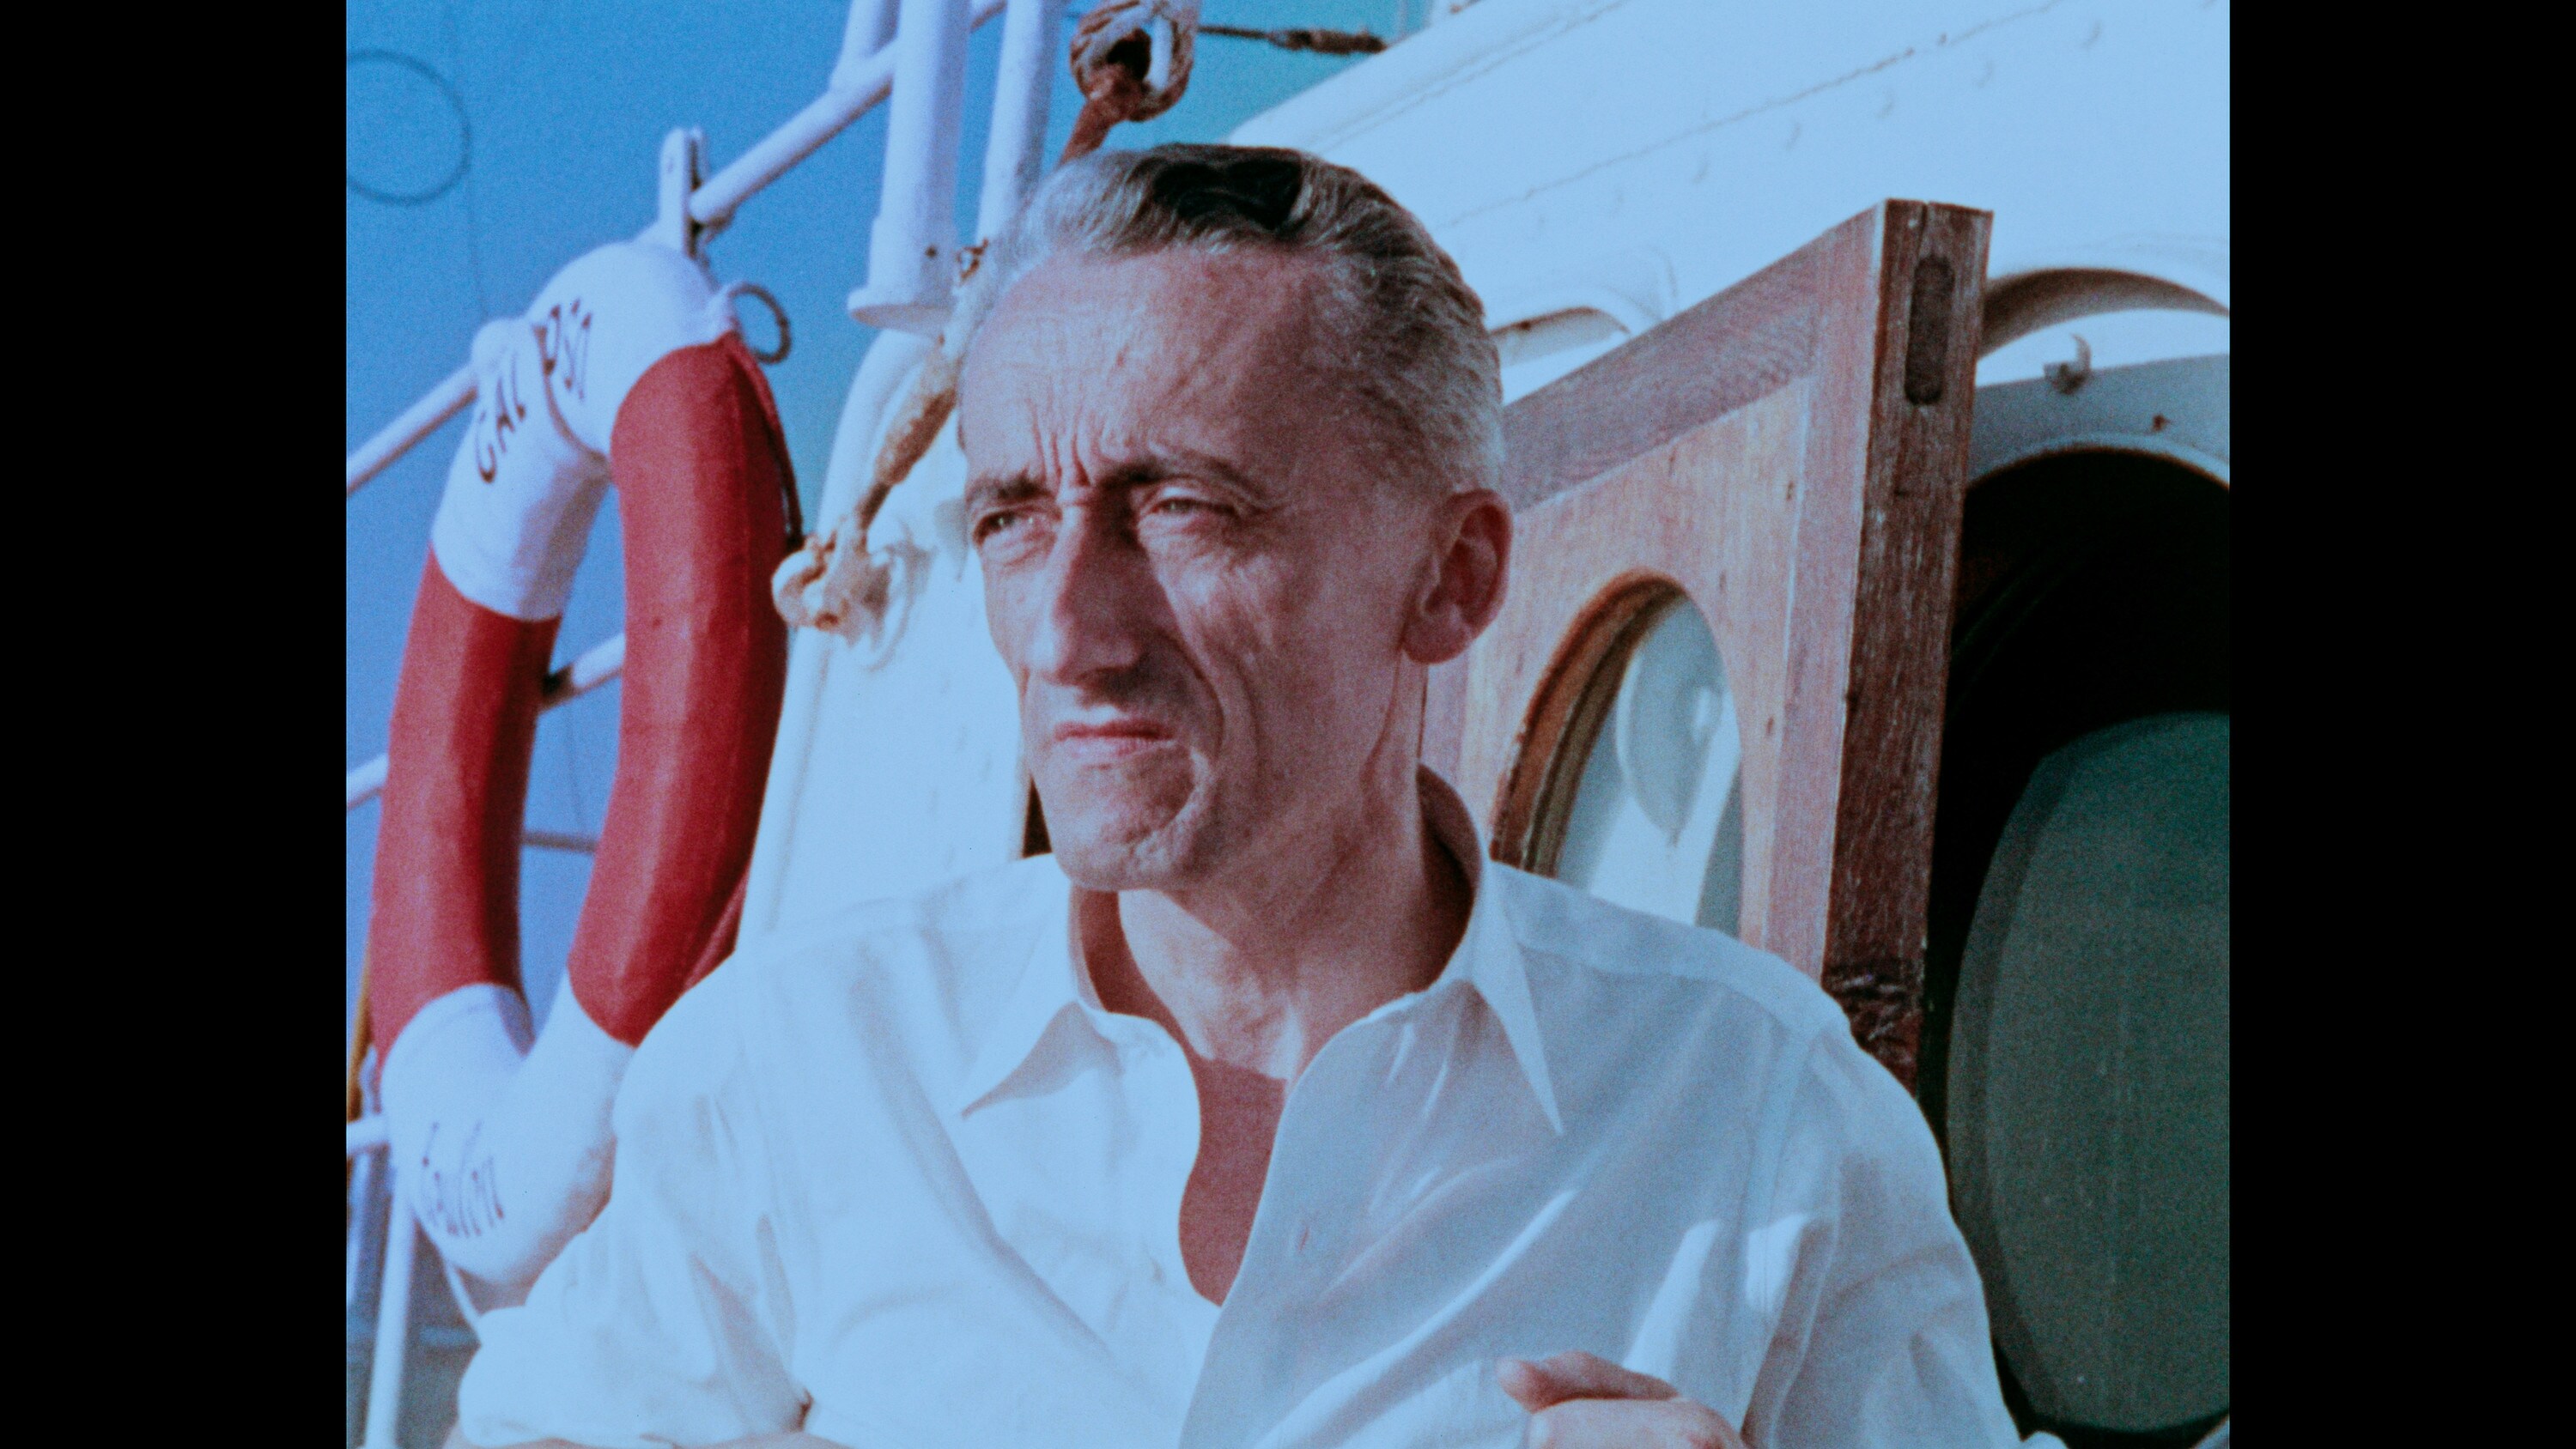 Jacques Cousteau aboard his ship Calypso, circa 1955. (Credit: The Cousteau Society)